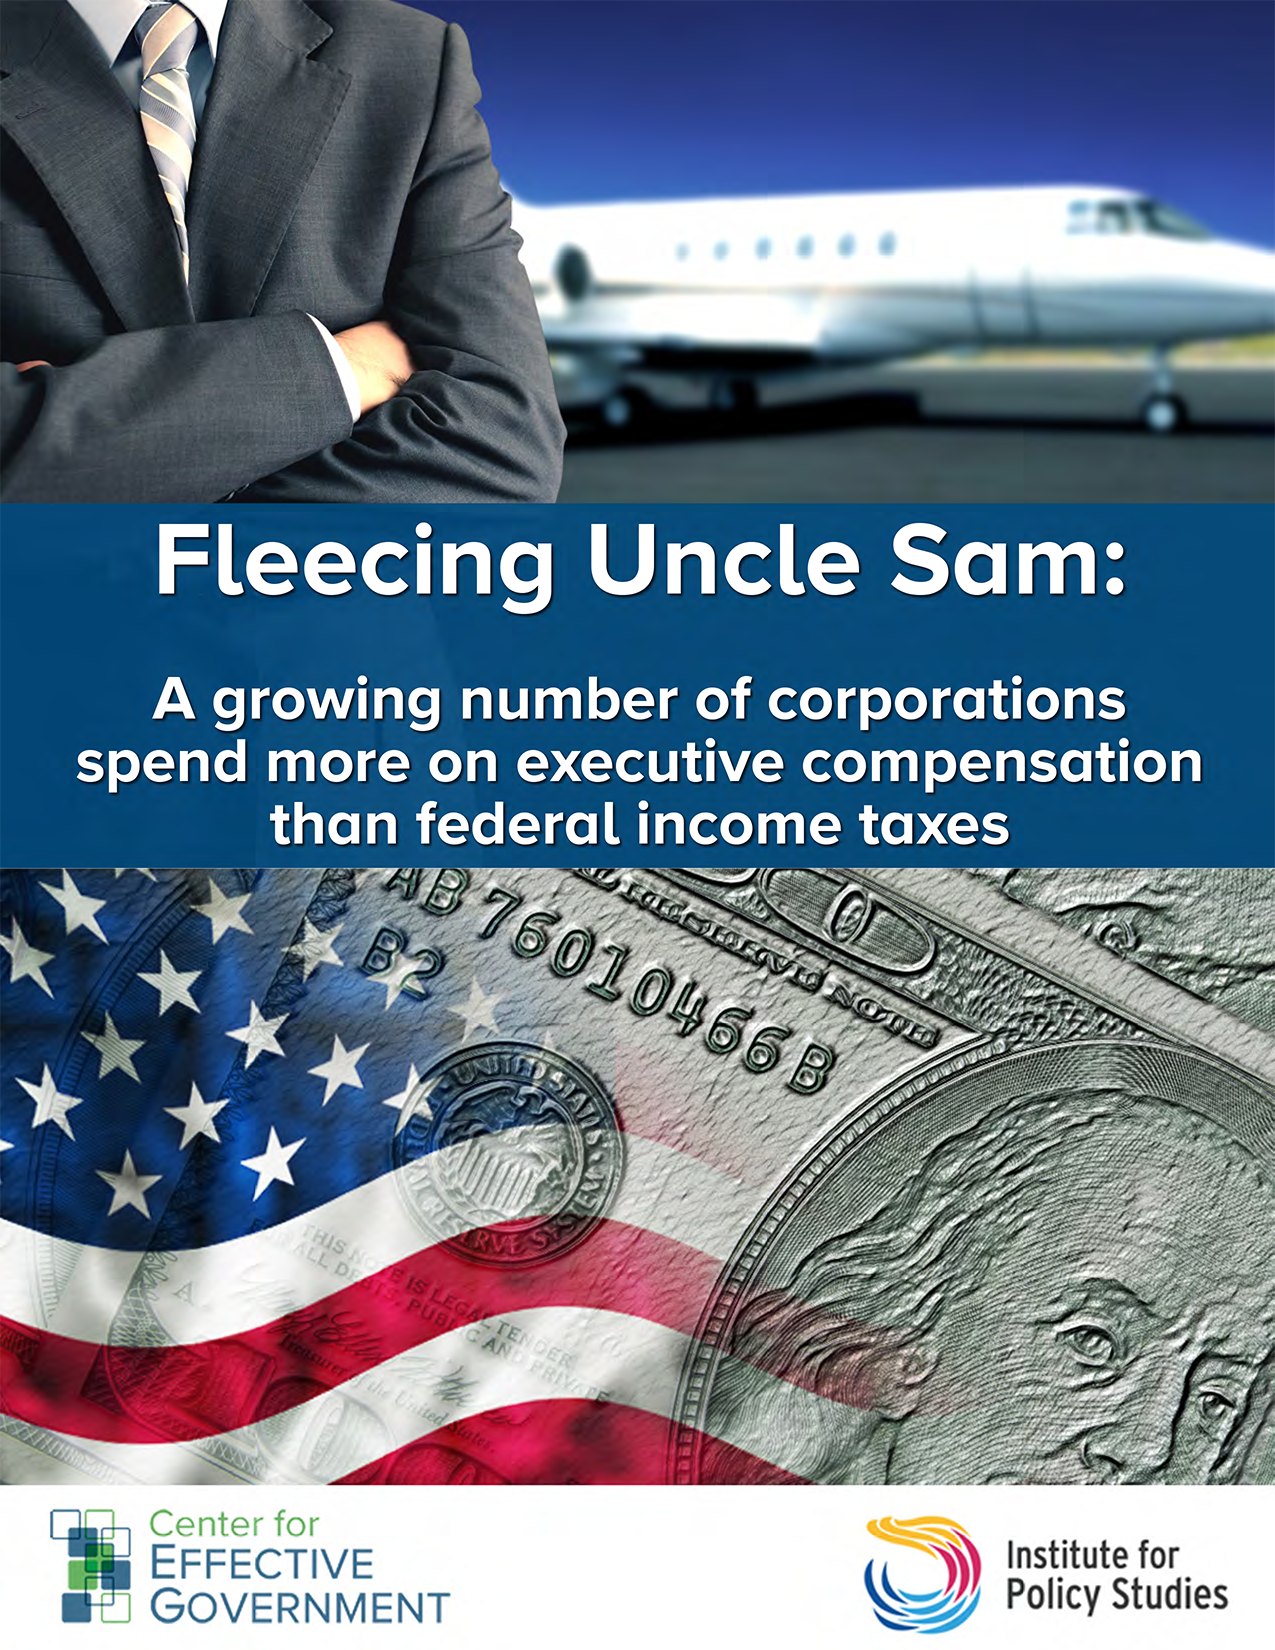 FOR IMMEDIATE RELEASE: Paying CEOs More than Uncle Sam